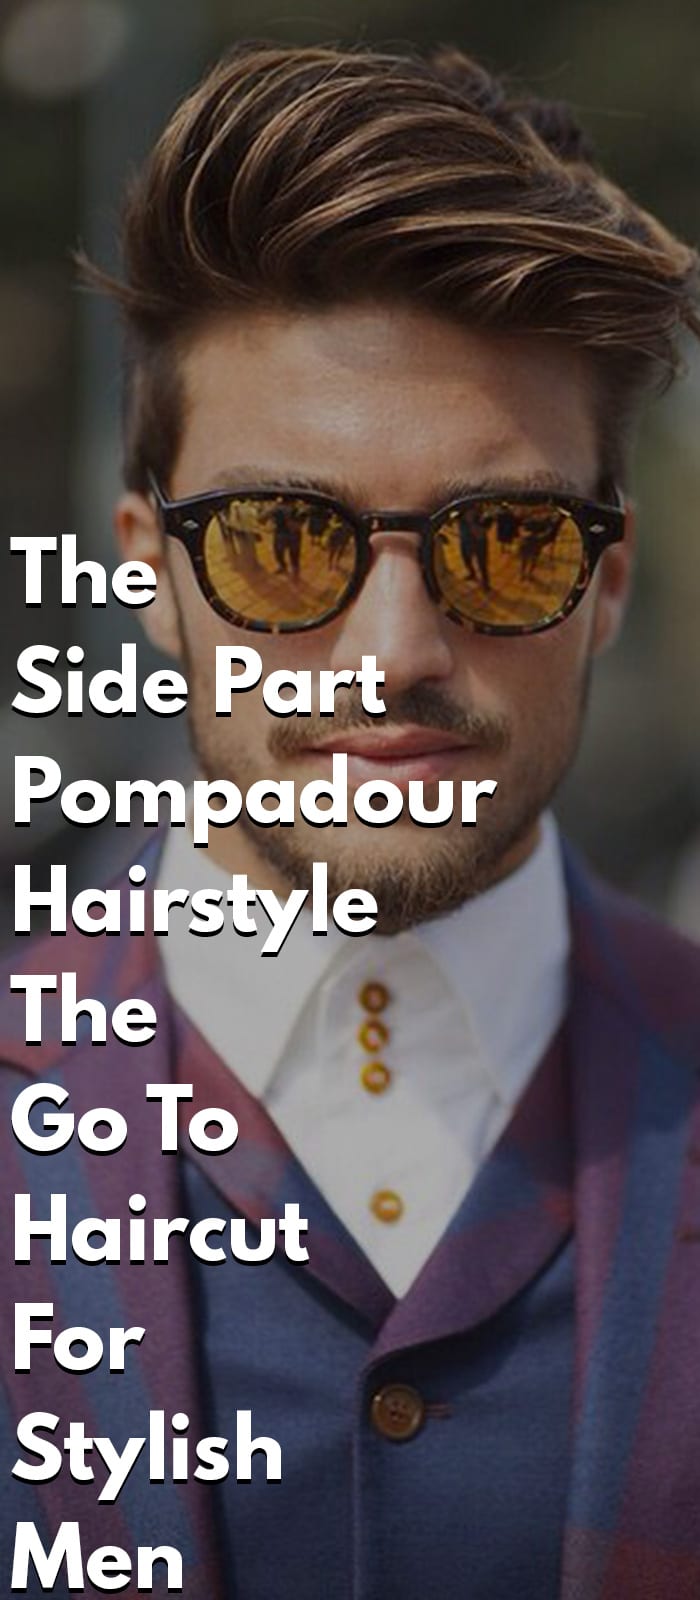 Side Part Pompadour Hairstyle